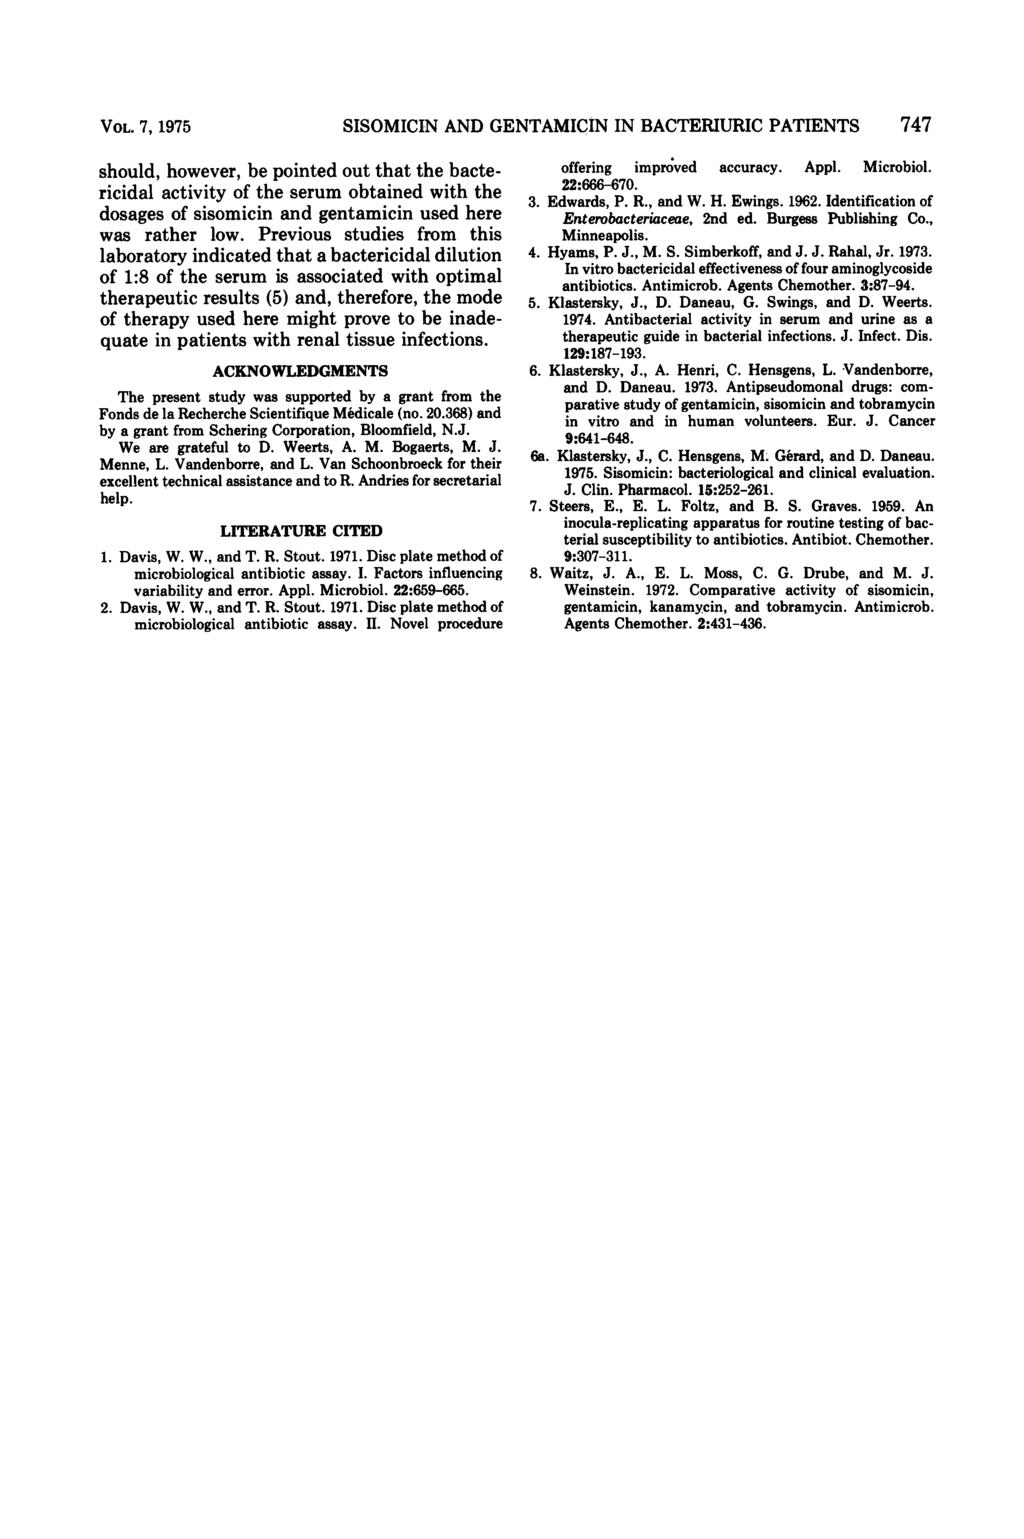 VOL. 7, 1975 should, however, be pointed out that the bactericidal activity of the serum obtained with the dosages of sisomicin and gentamicin used here was rather low.